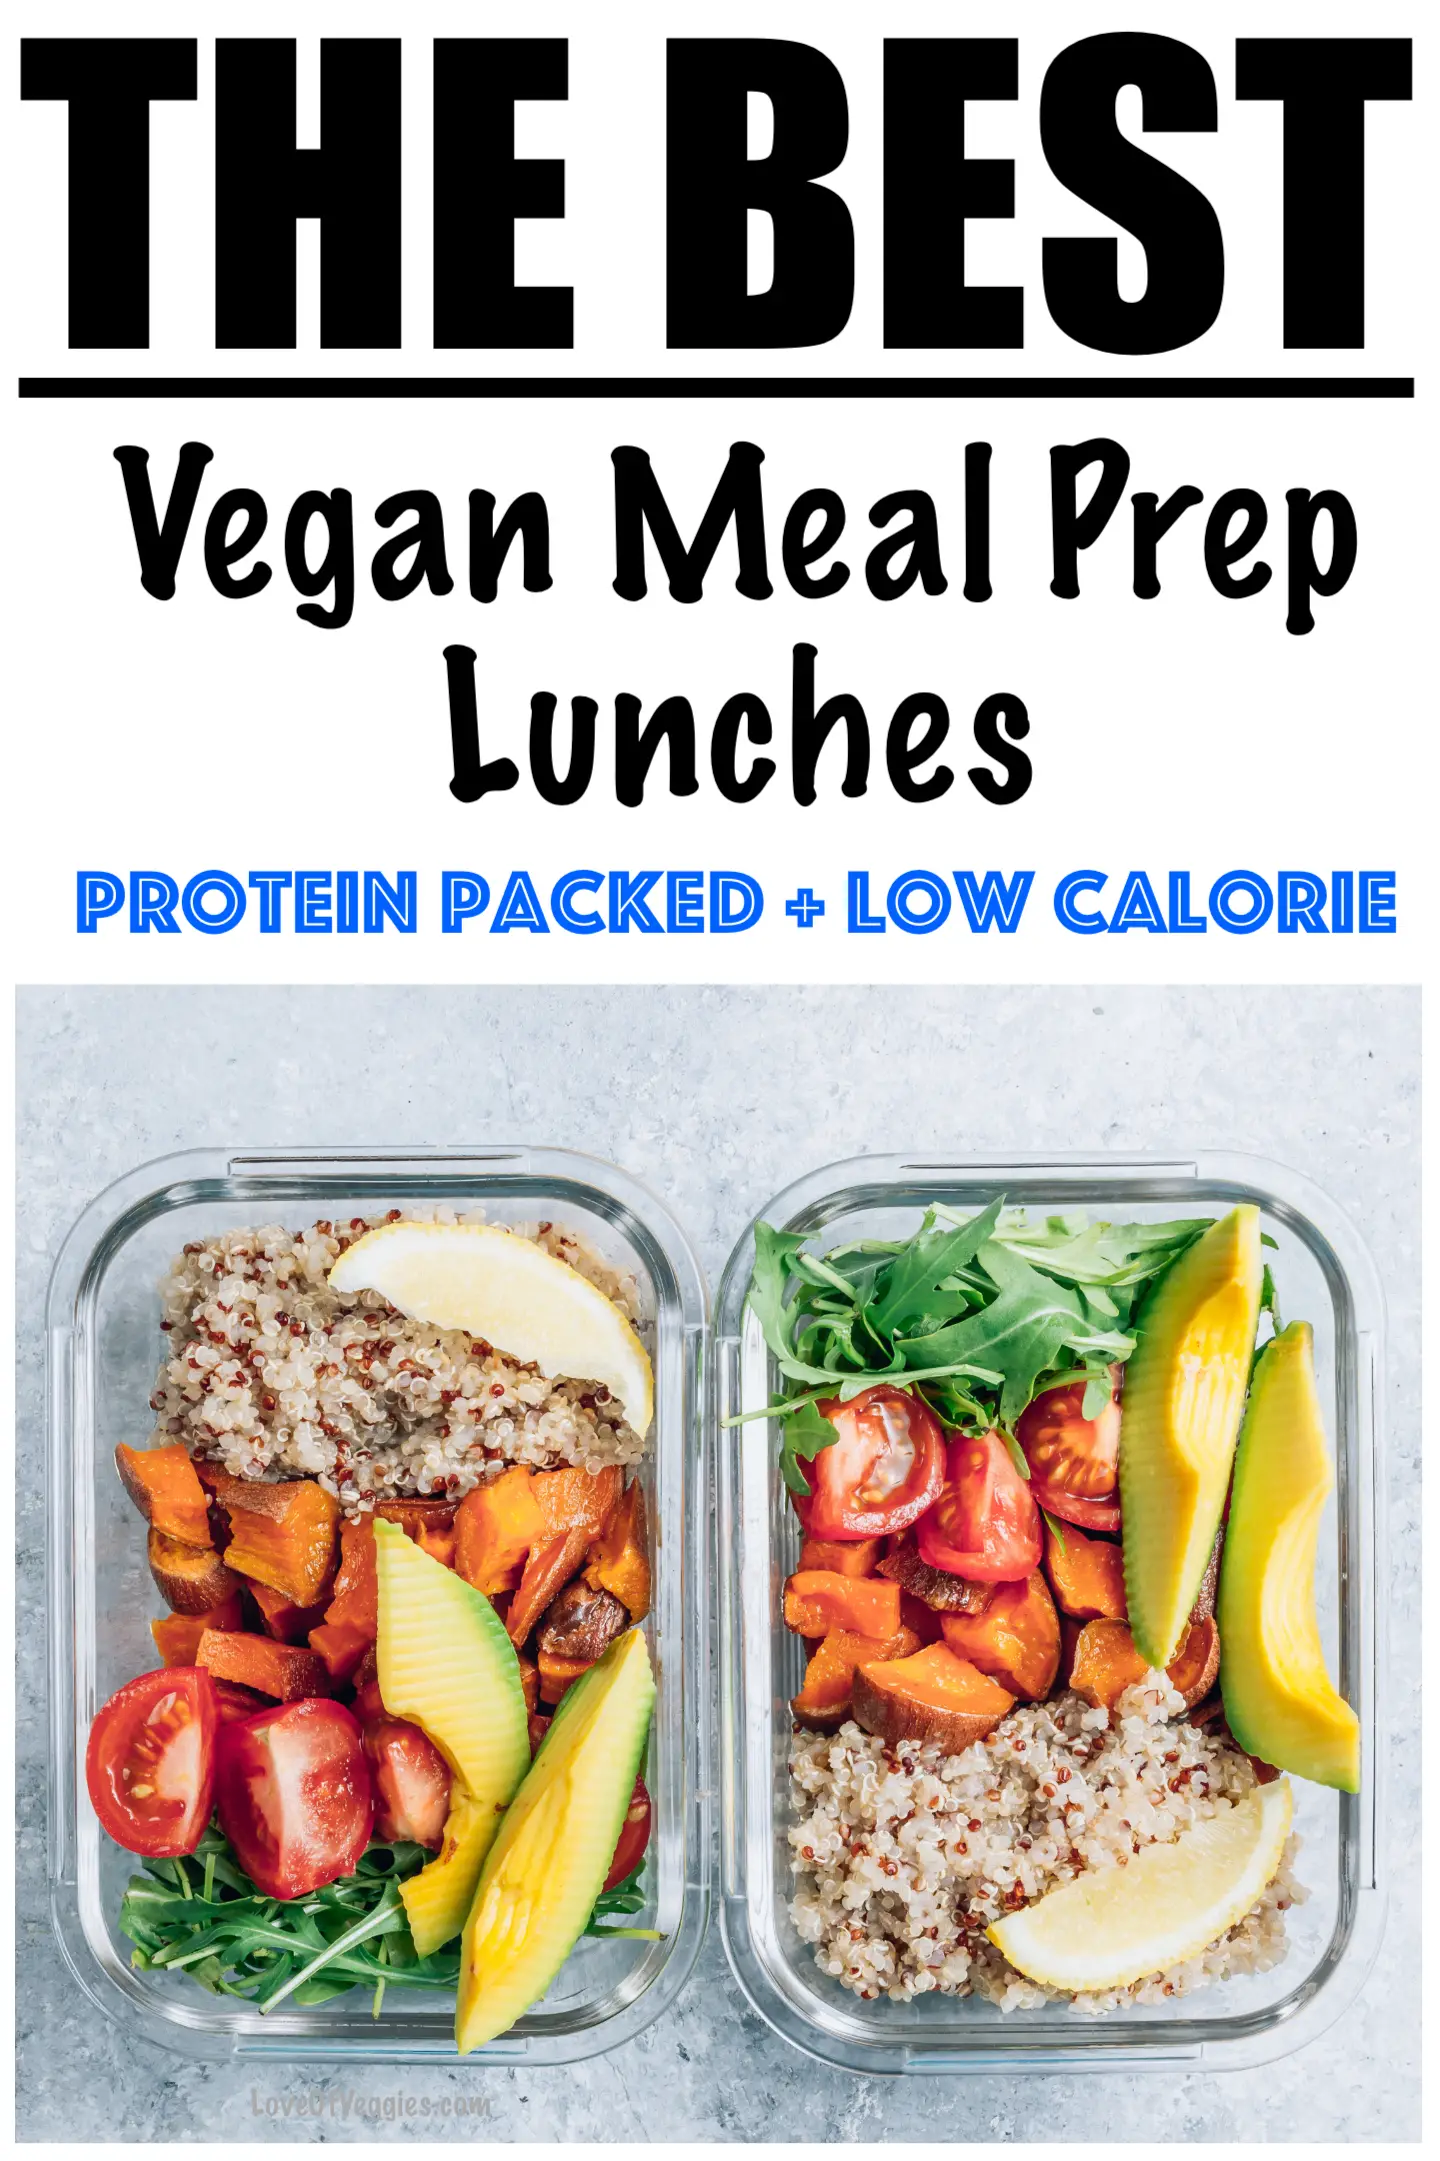 Vegan Meal Prep Lunches